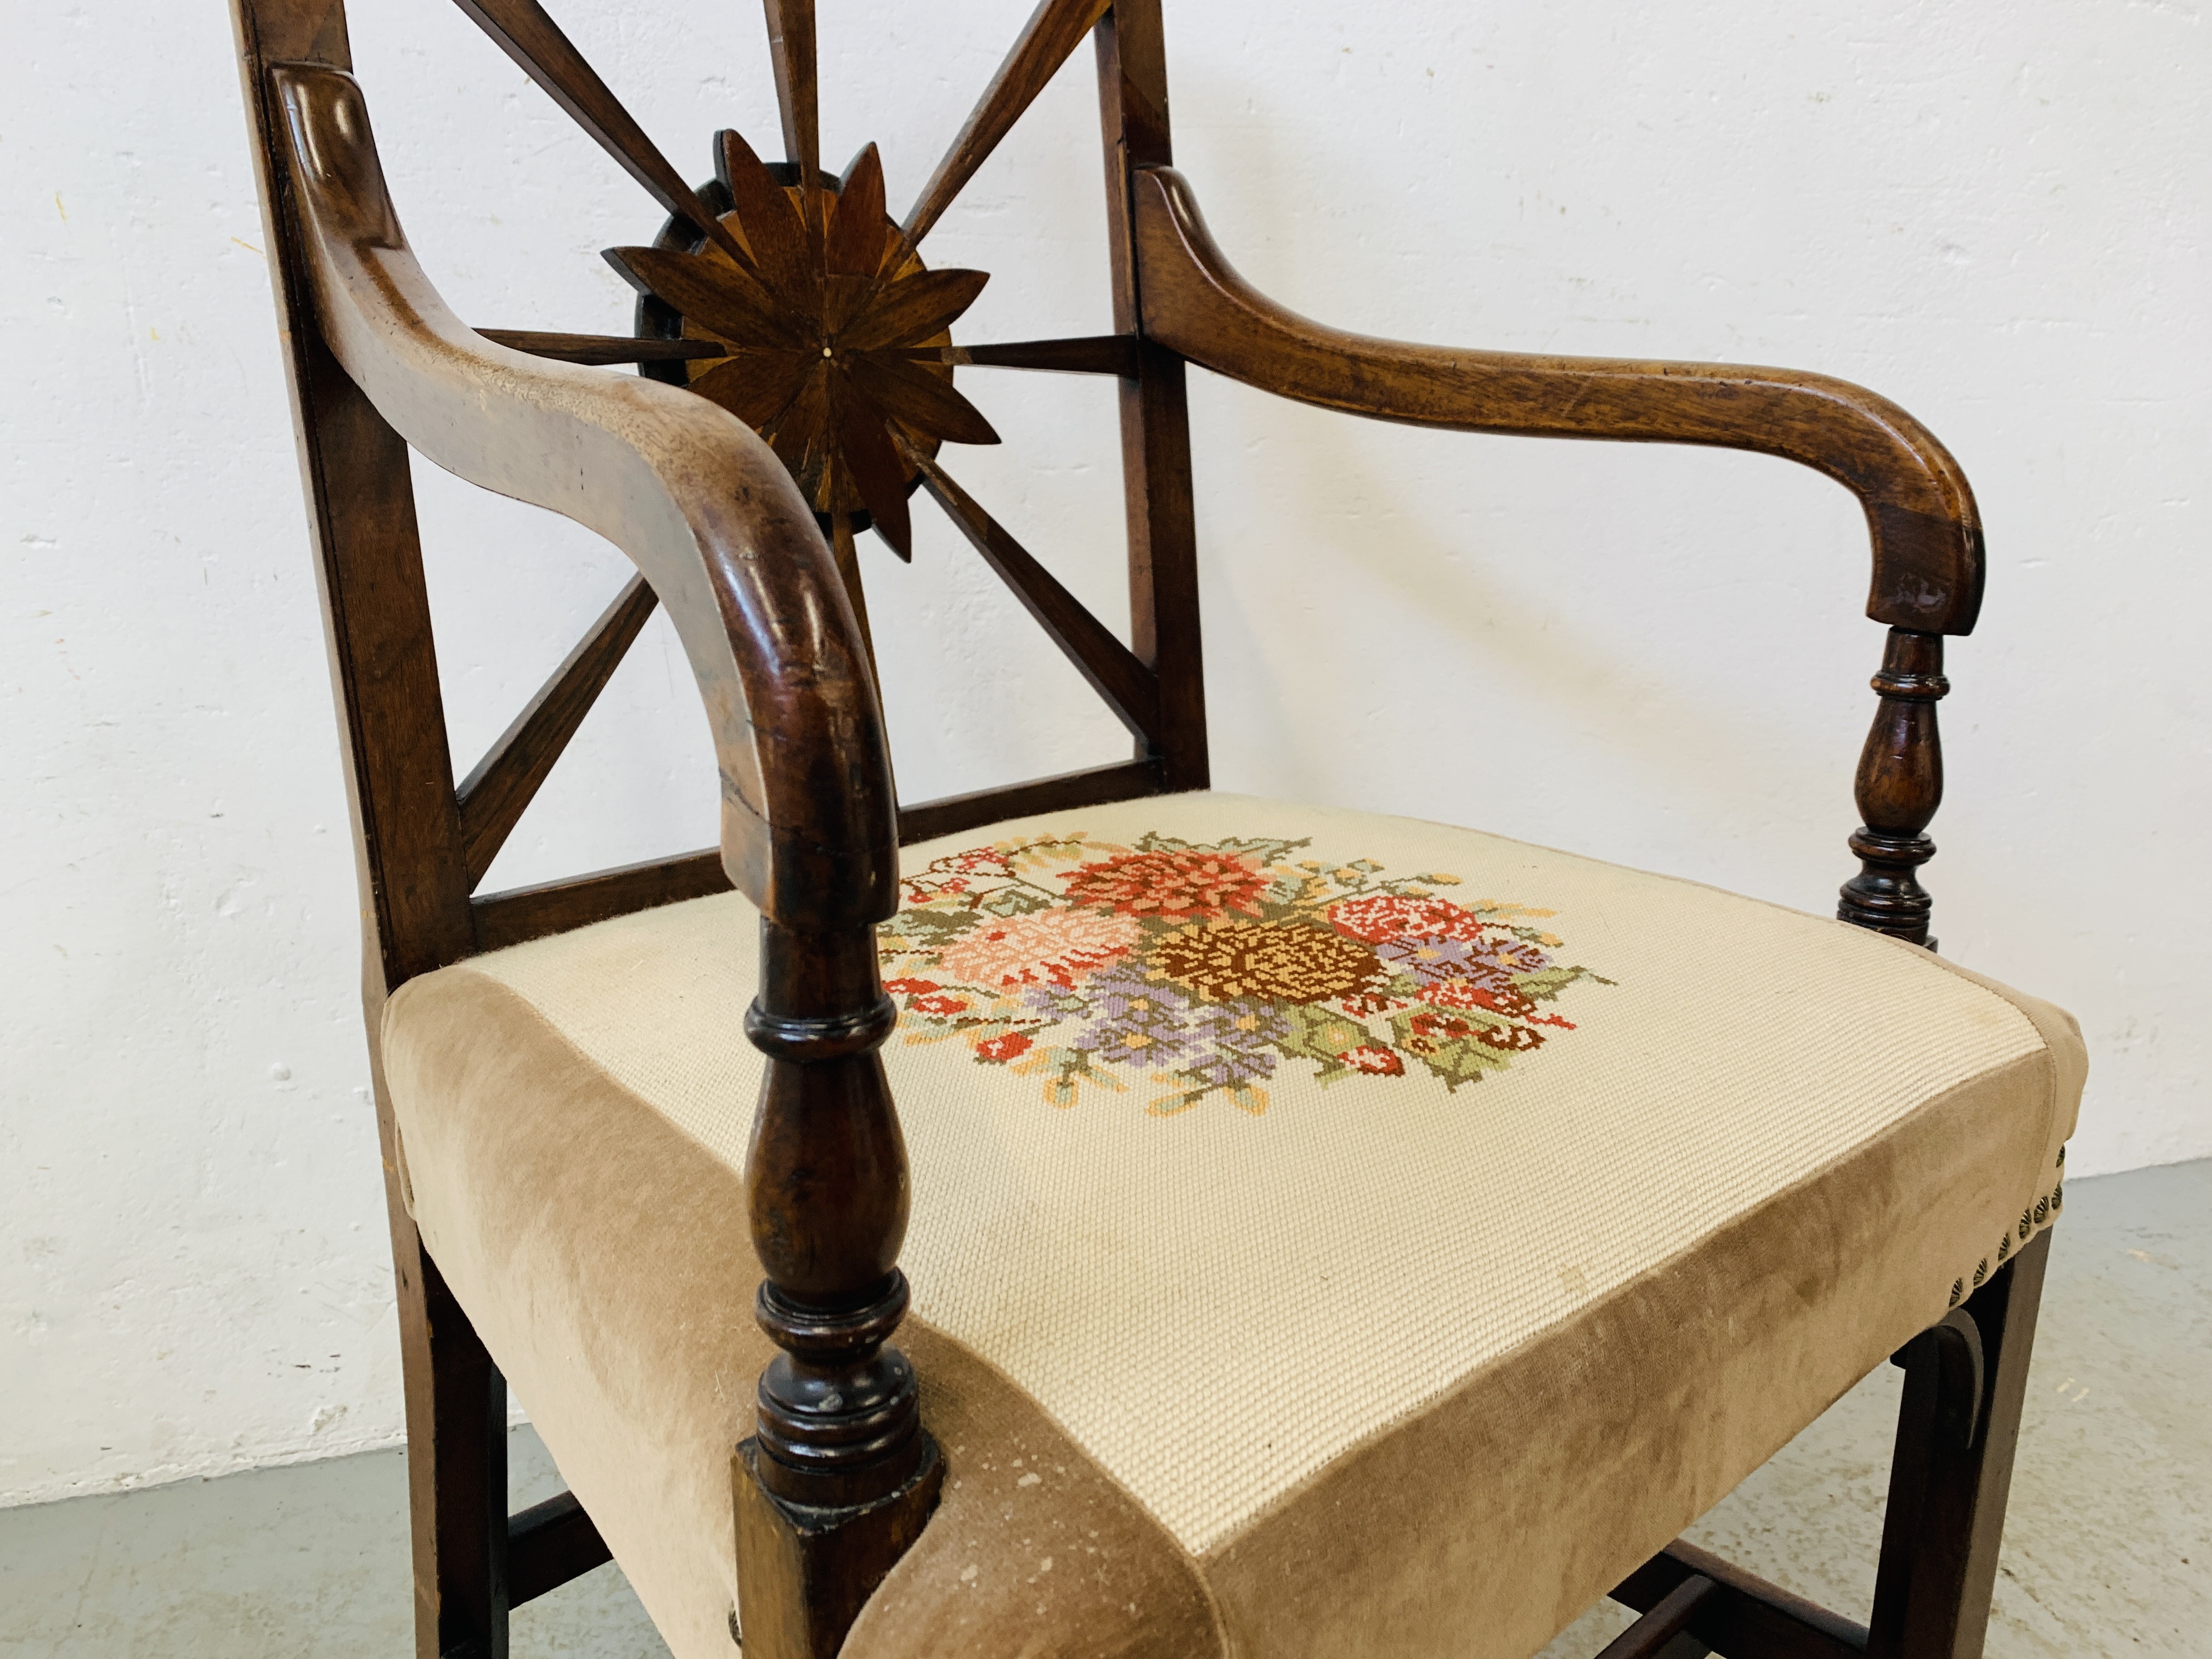 A PERIOD MAHOGANY ELBOW CHAIR WITH UNUSUAL FLOWERHEAD DESIGN TO BACK AND EMBROIDED SEAT - Image 3 of 5